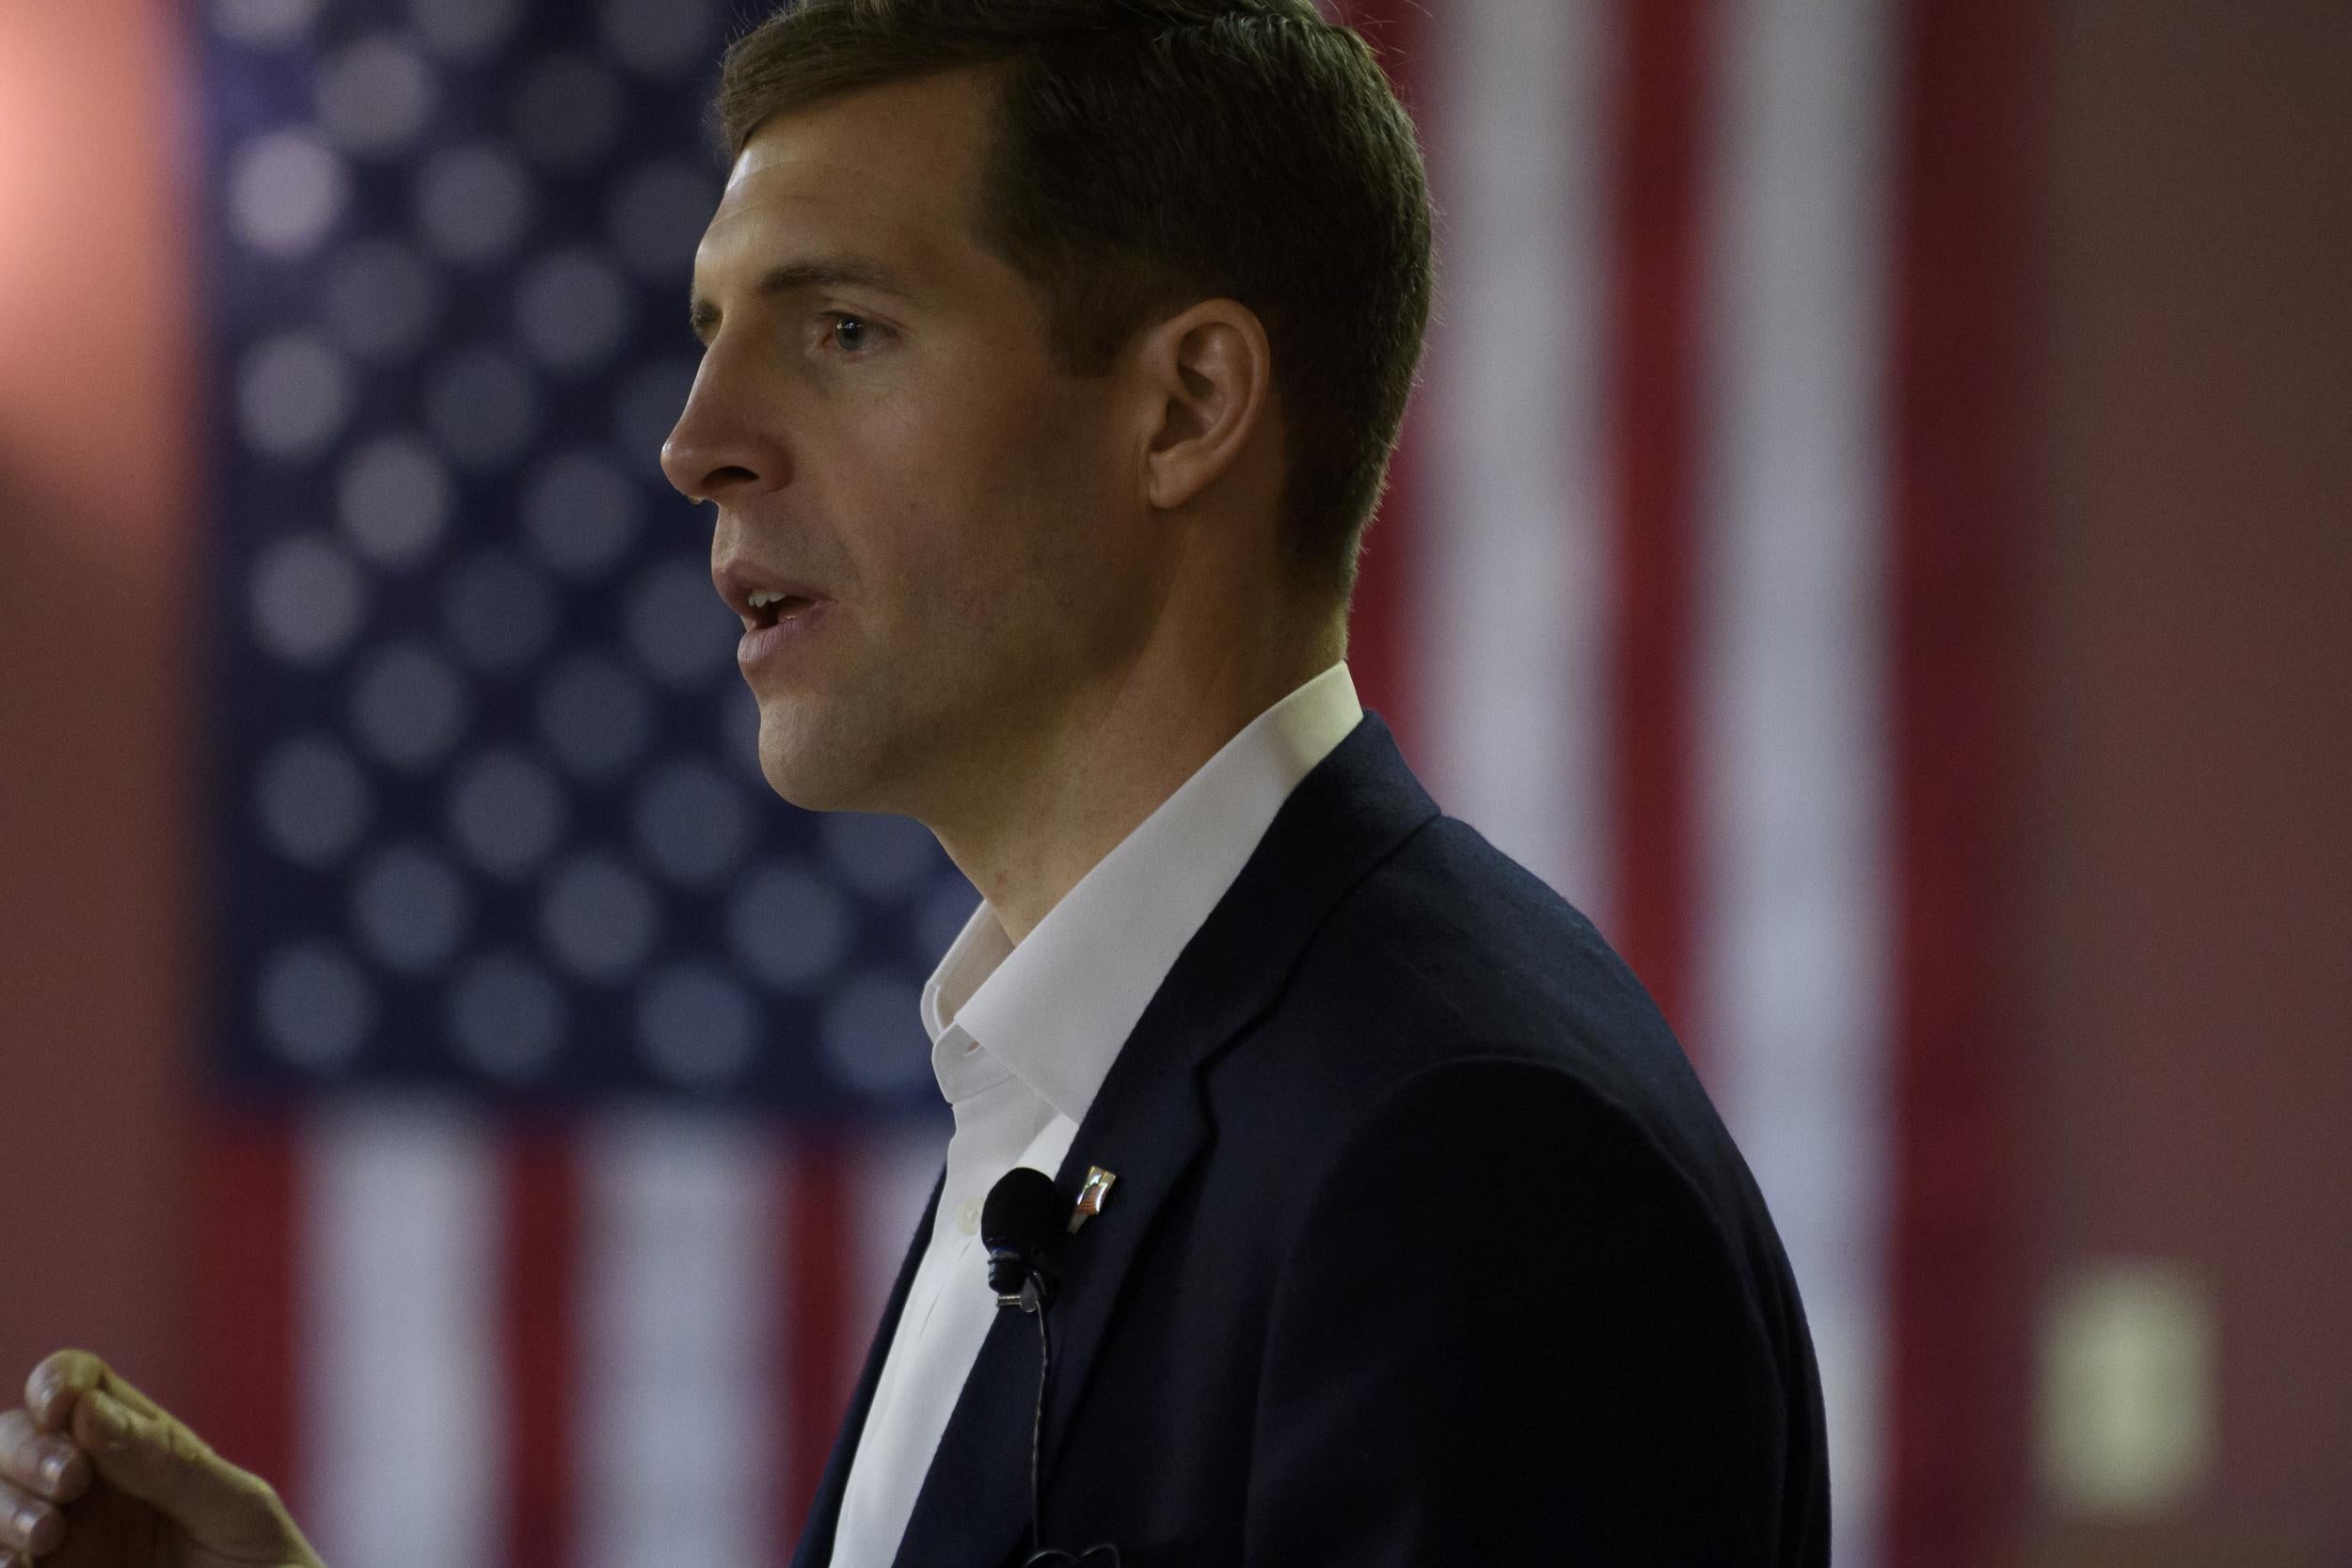 Democrat Conor Lamb, a candidate to represent Pennsylvania's 18th congressional district, speaks to an audience at the American Legion Post